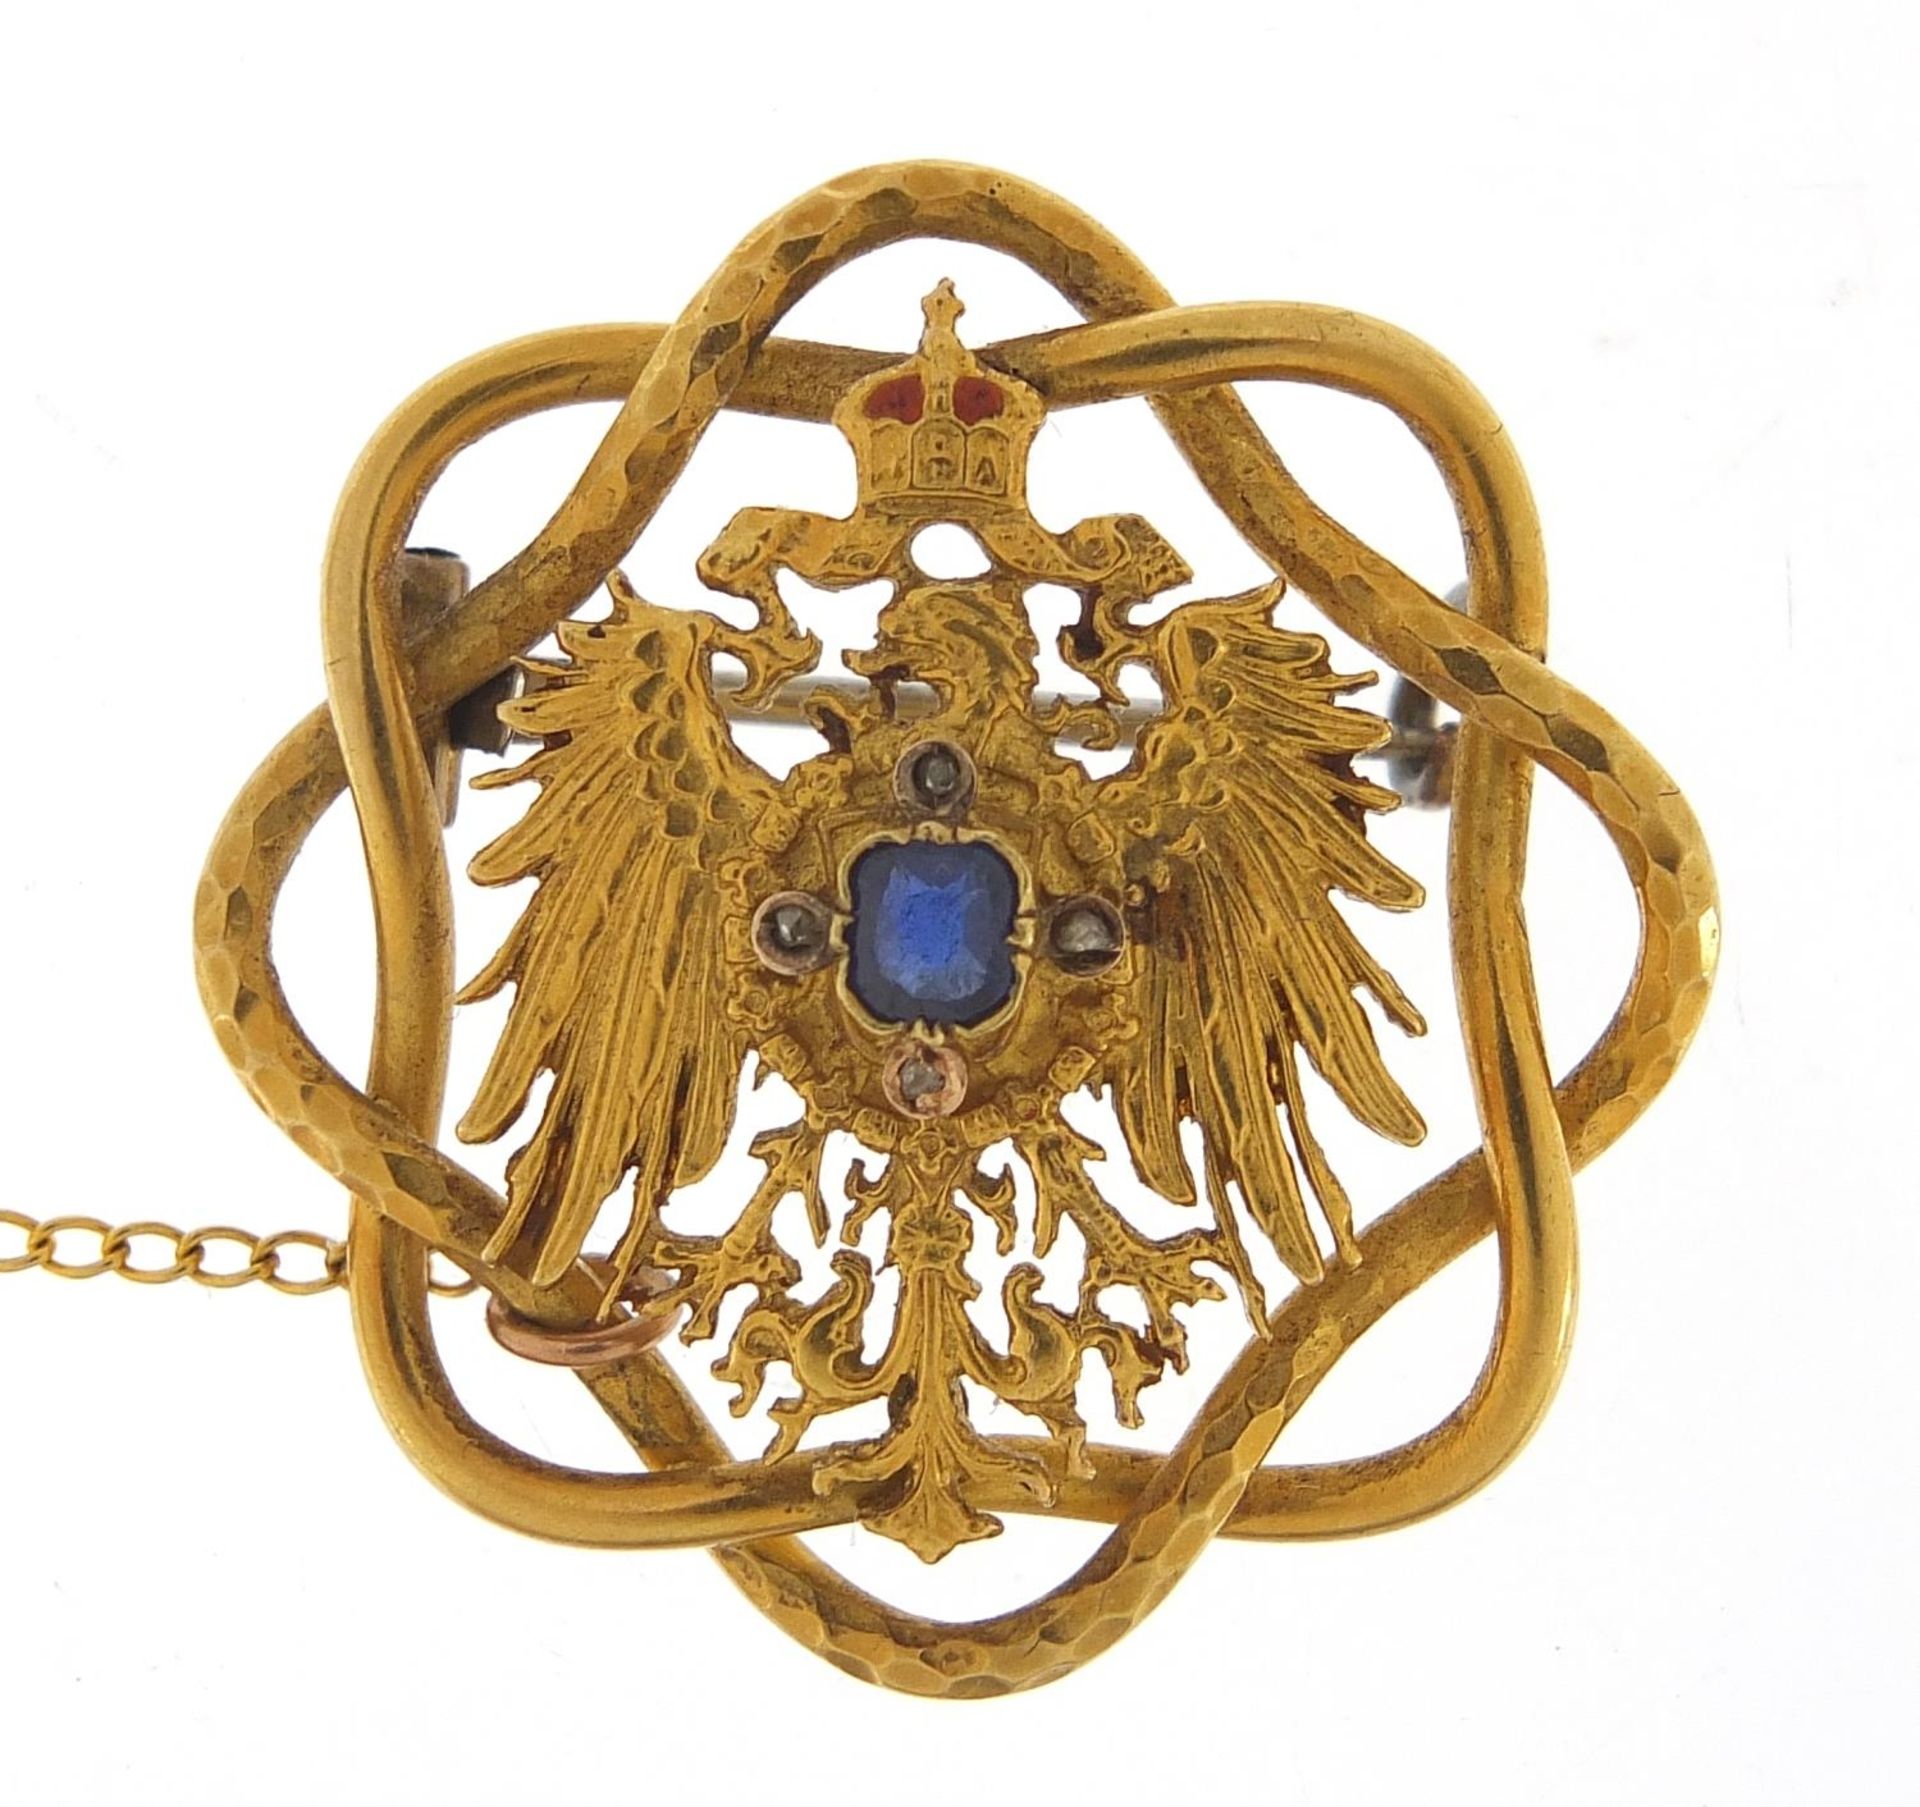 Unmarked gold Polish eagle with crown brooch set with sapphire and diamonds, housed in a Johann